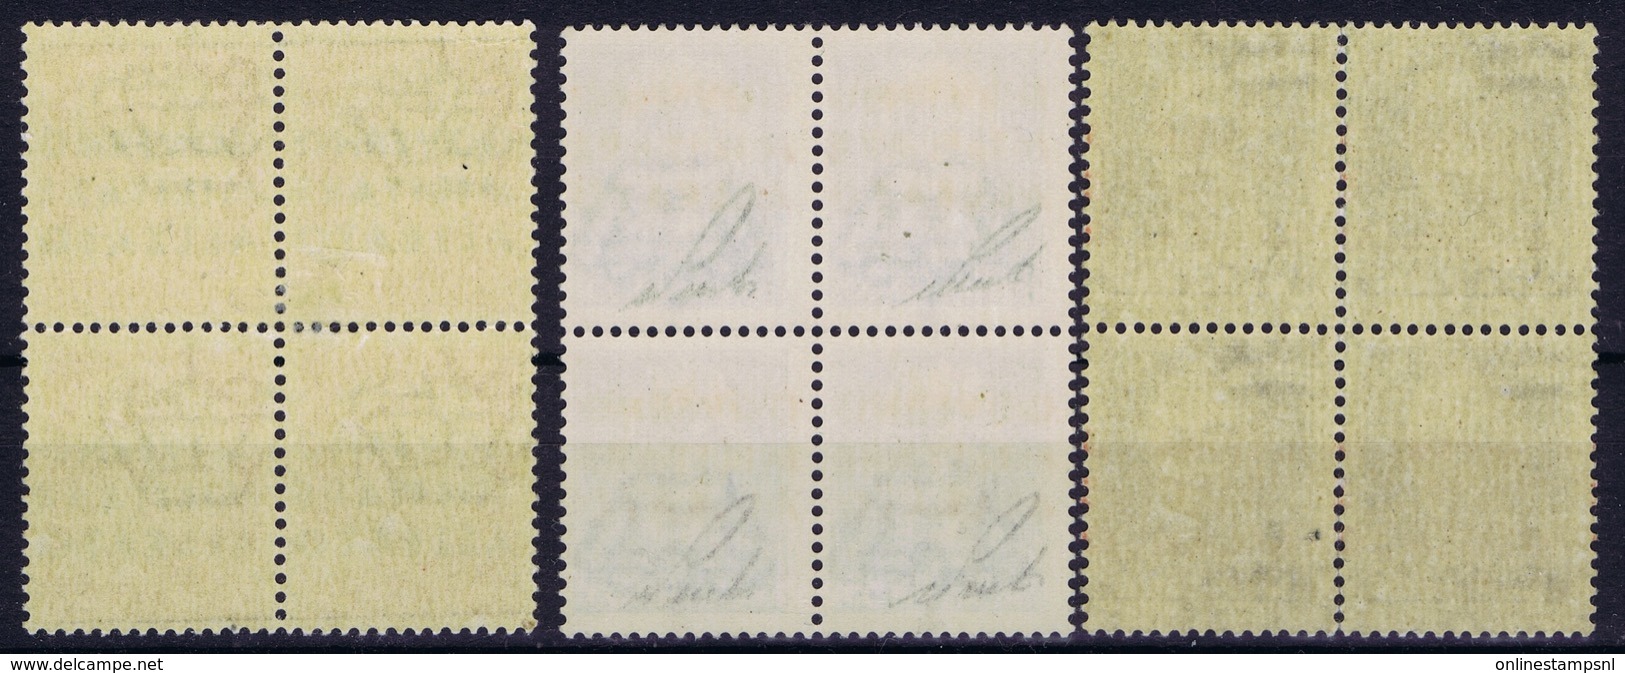 Italy:  Napoli   Sa 10 - 12  4 - Blocks Postfrisch/neuf Sans Charniere /MNH/** Nr 10 Is Hinged Nr 11 Is Signiert /signed - Occup. Anglo-americana: Napoli